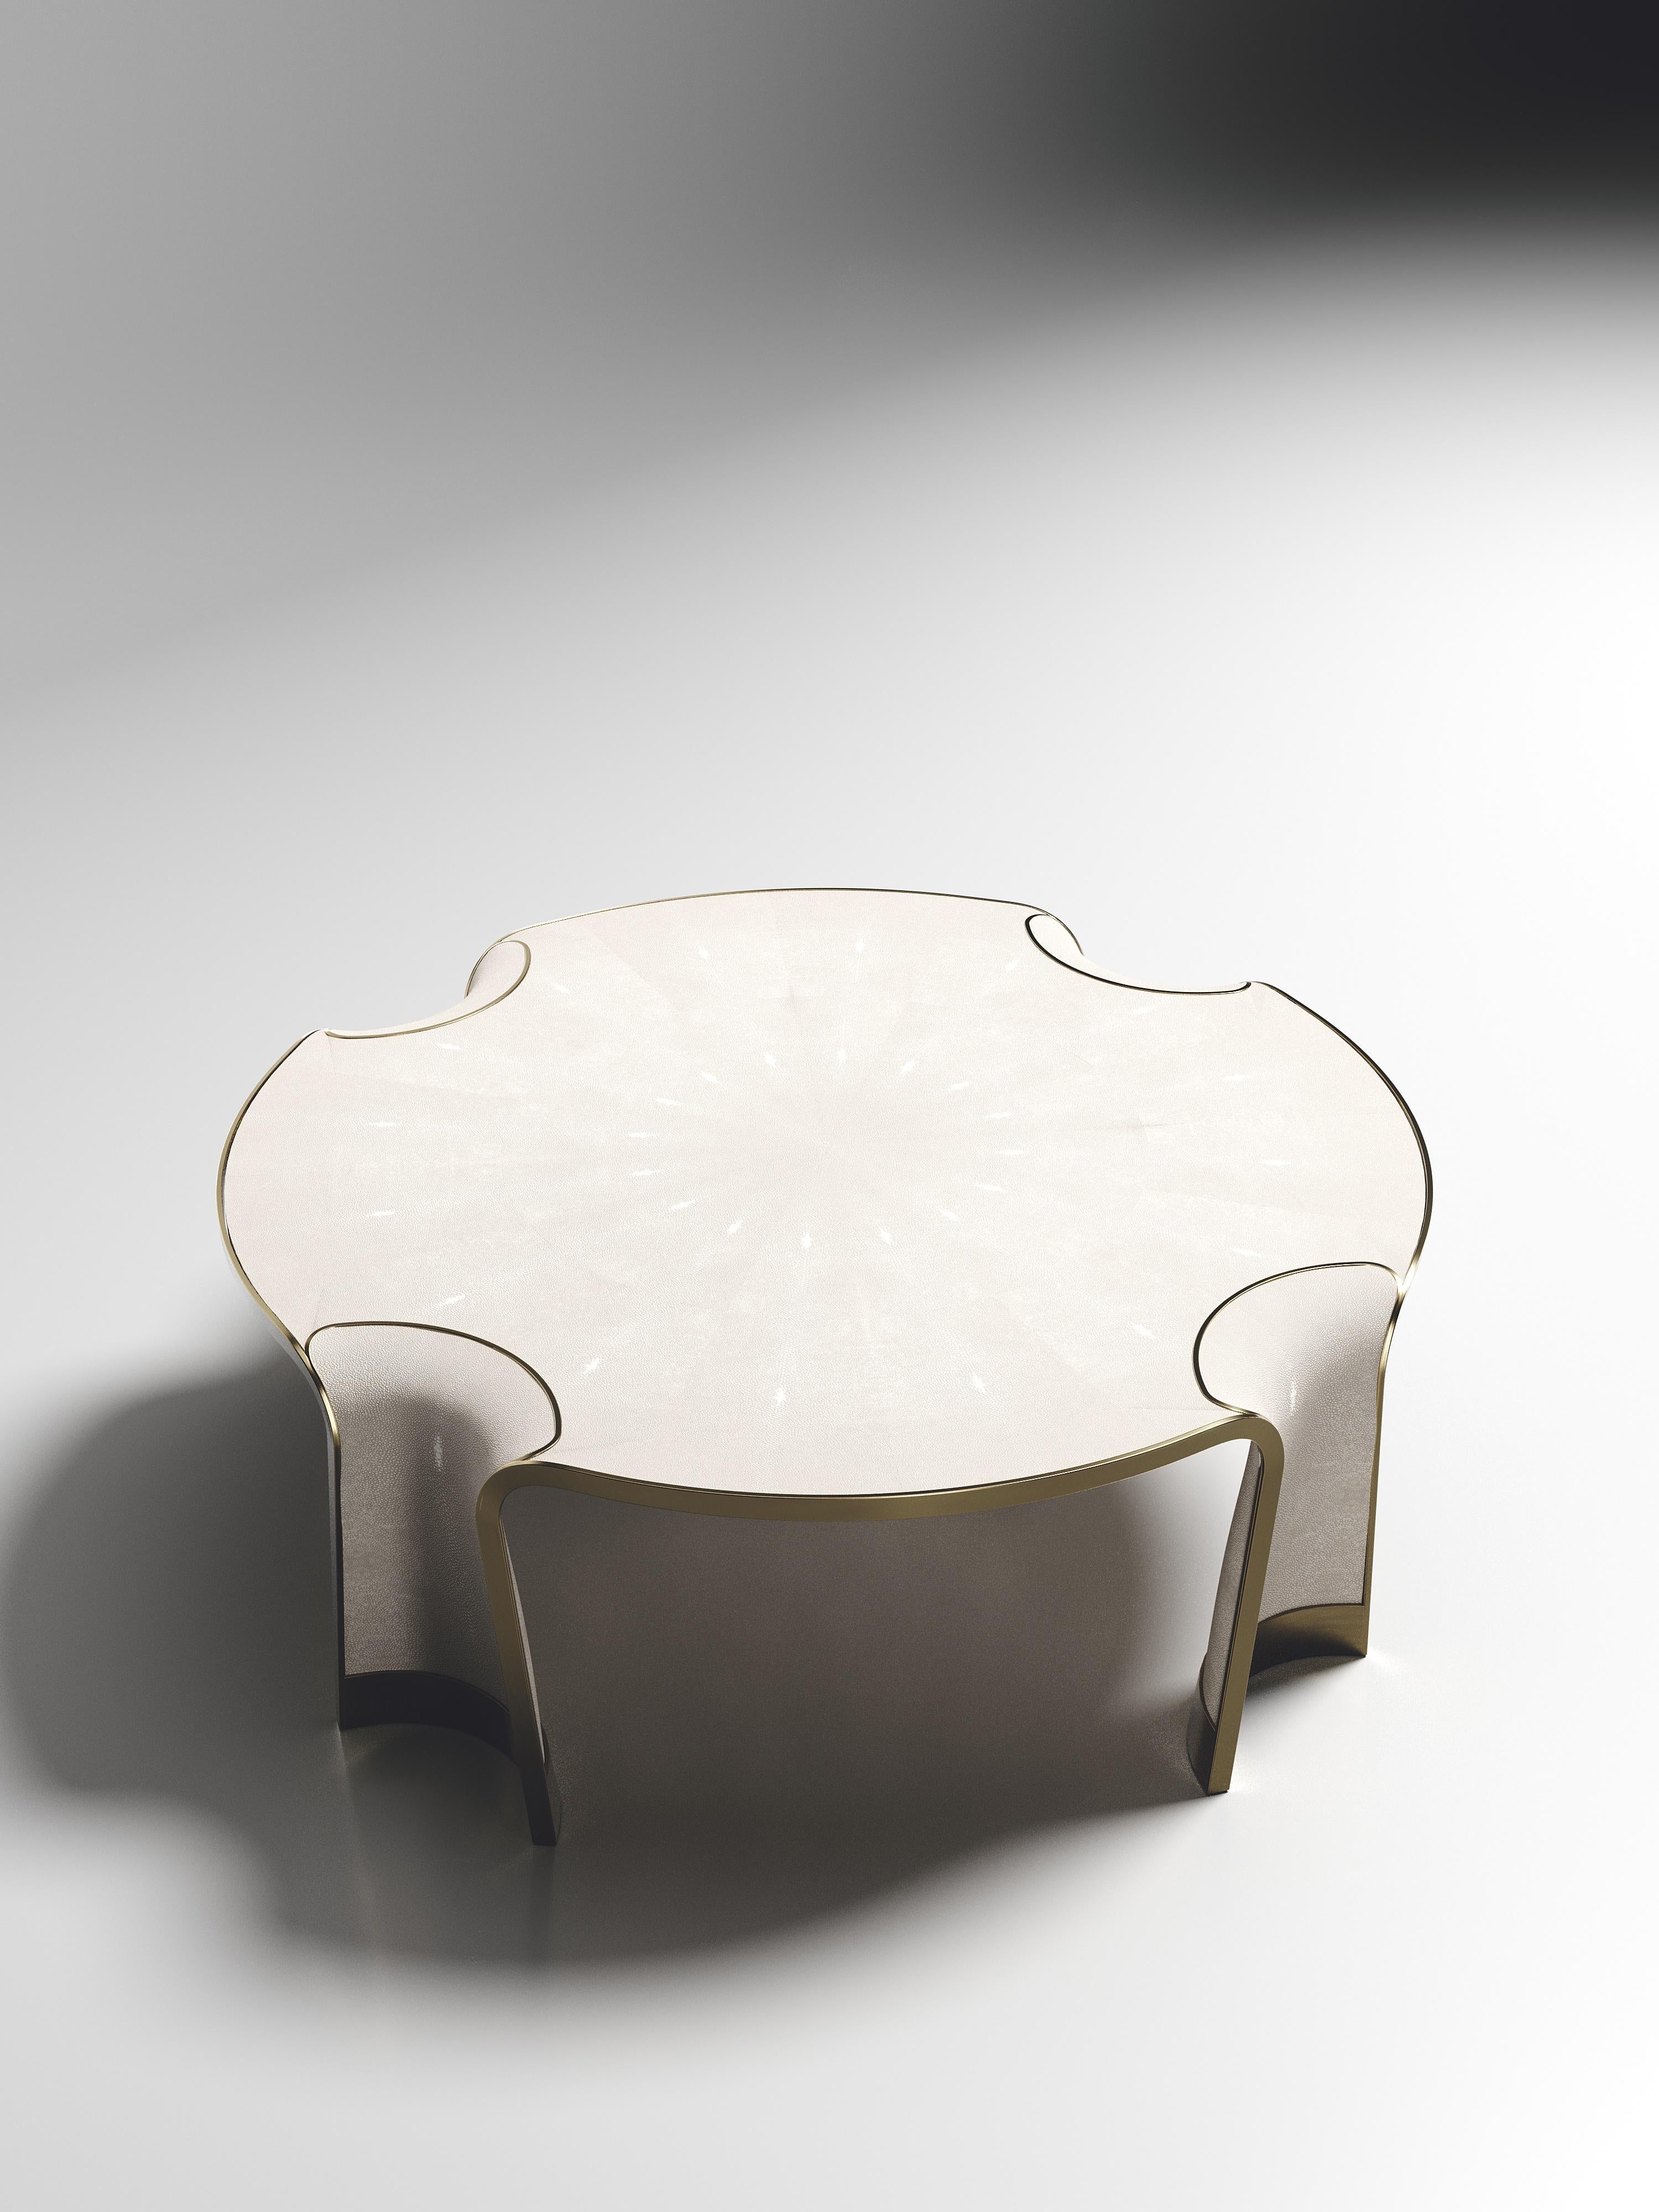 The Nymphea round coffee by R & Y Augousti in shagreen with bronze-patina brass details explores the brand's iconic DNA of bringing old world artisanal craft into a contemporary and utterly luxury feel. This table is done in a cream shagreen finish